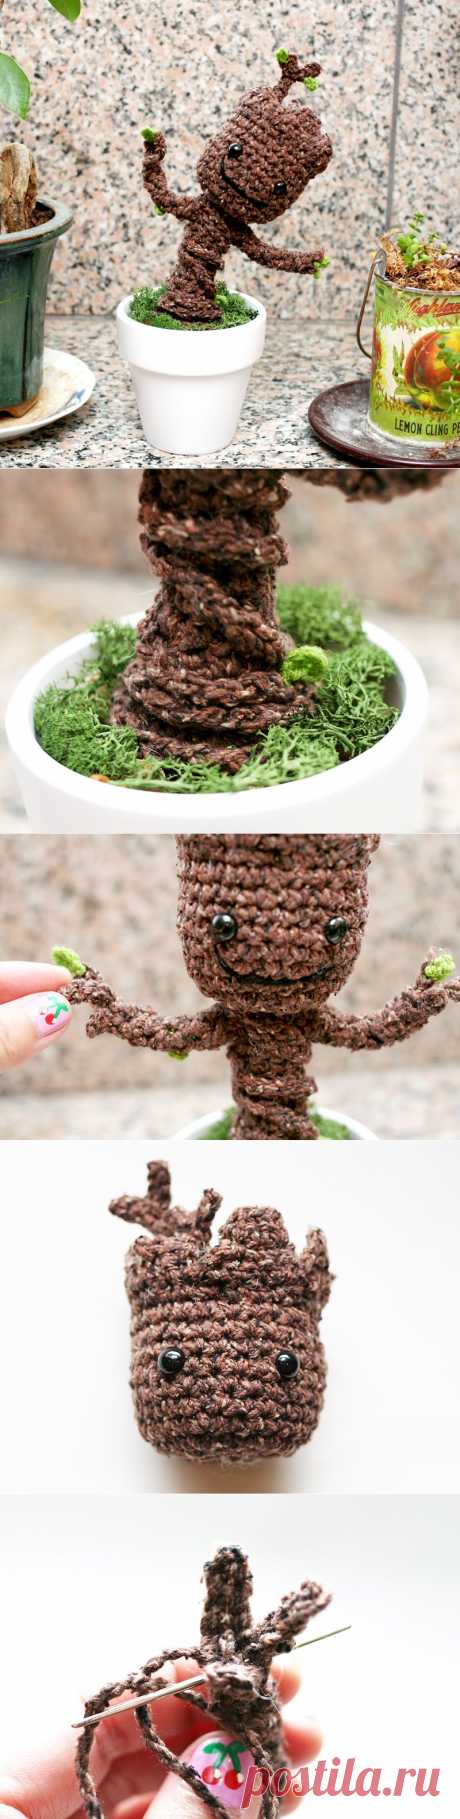 Free Crochet Pattern: Potted Baby Groot from Guardians of the Galaxy | Twinkie Chan Blog